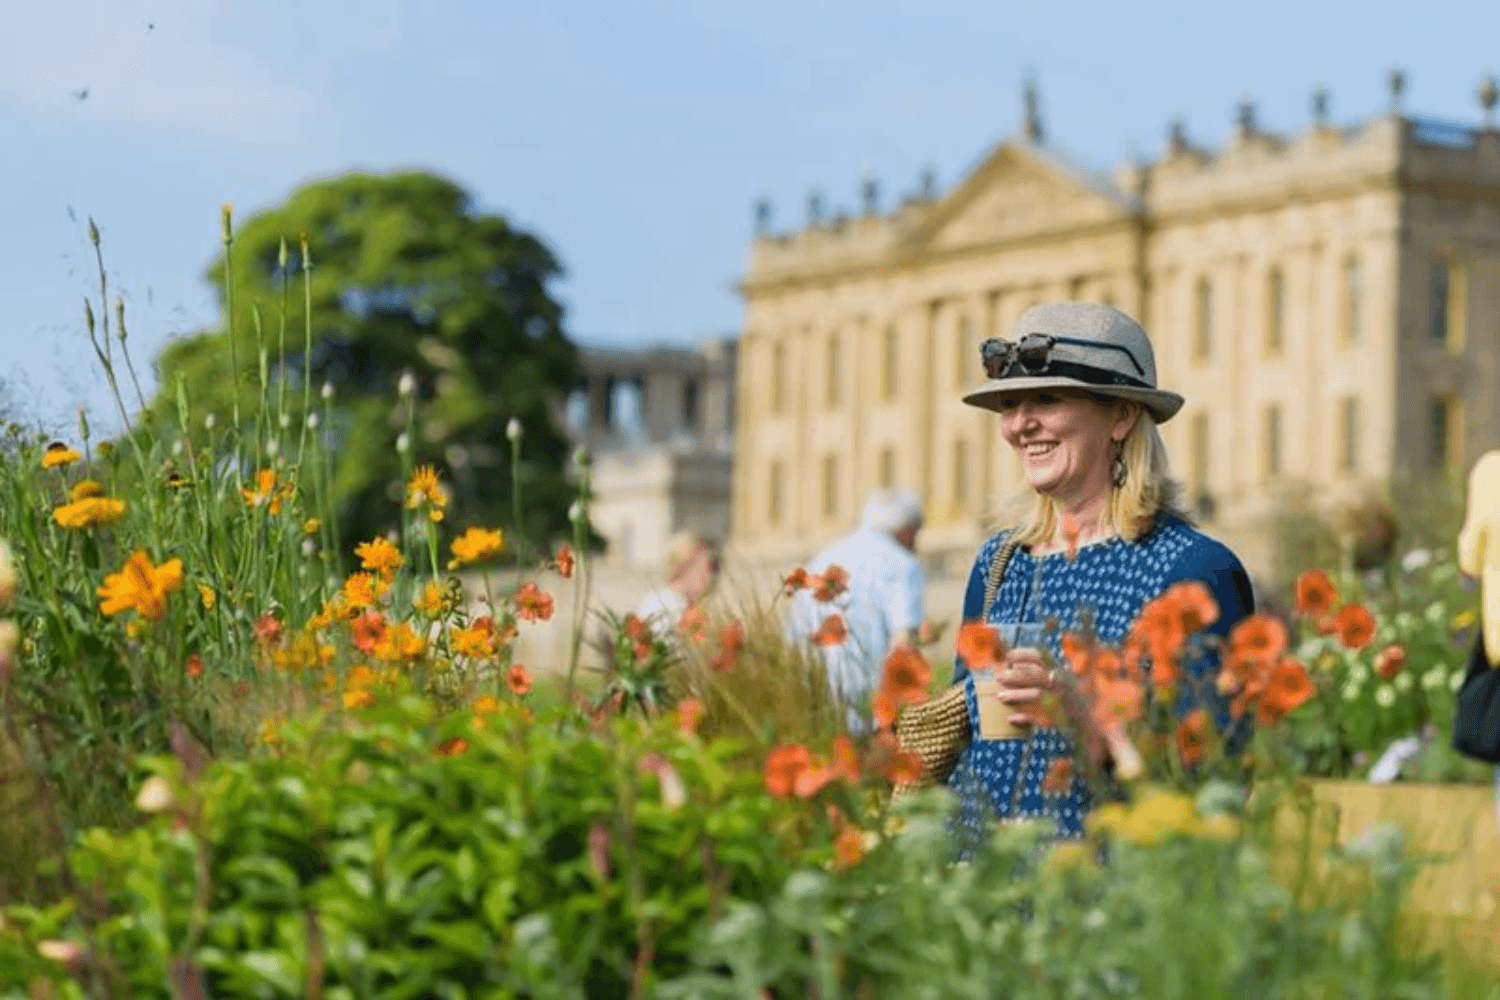 The RHS Chatsworth Flower Show